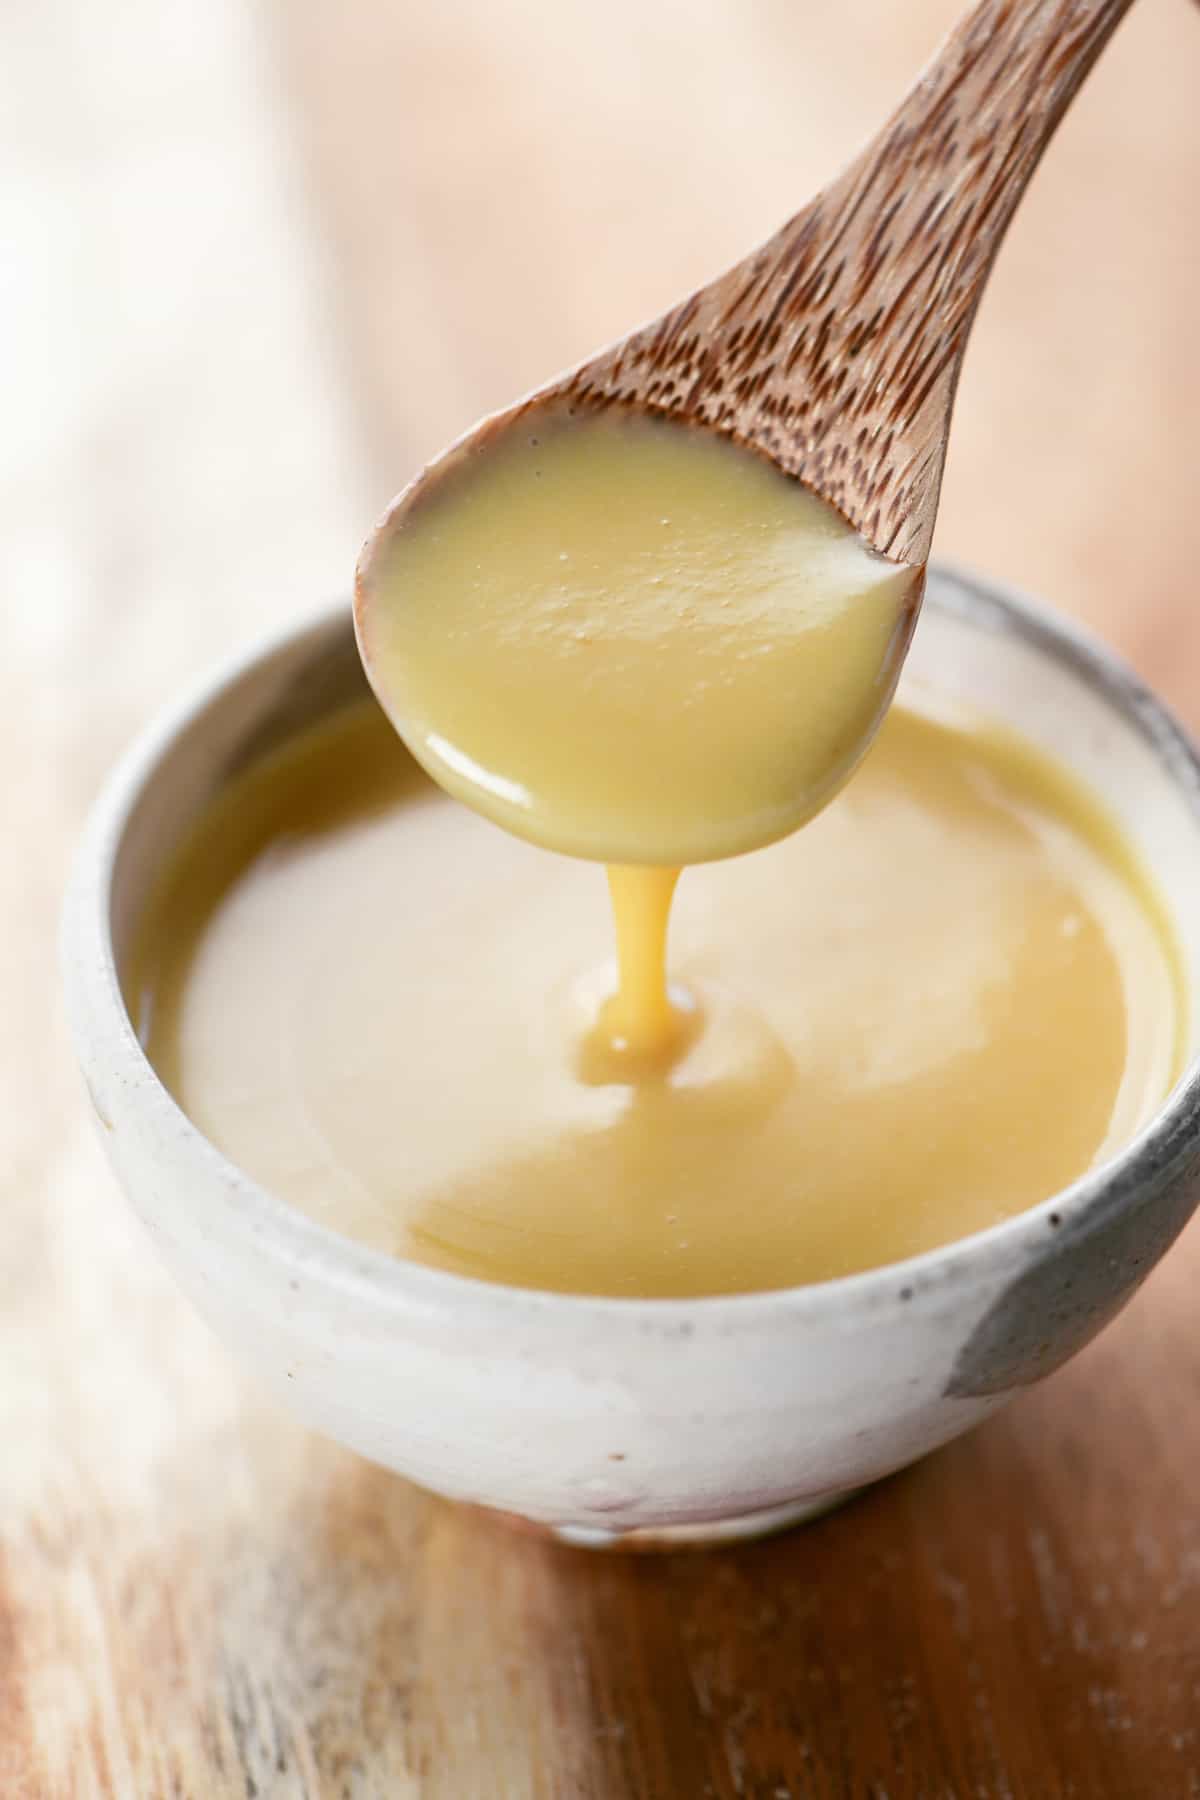 Spicy Honey Mustard sauce drizzled from a wooden spoon into a bowl.